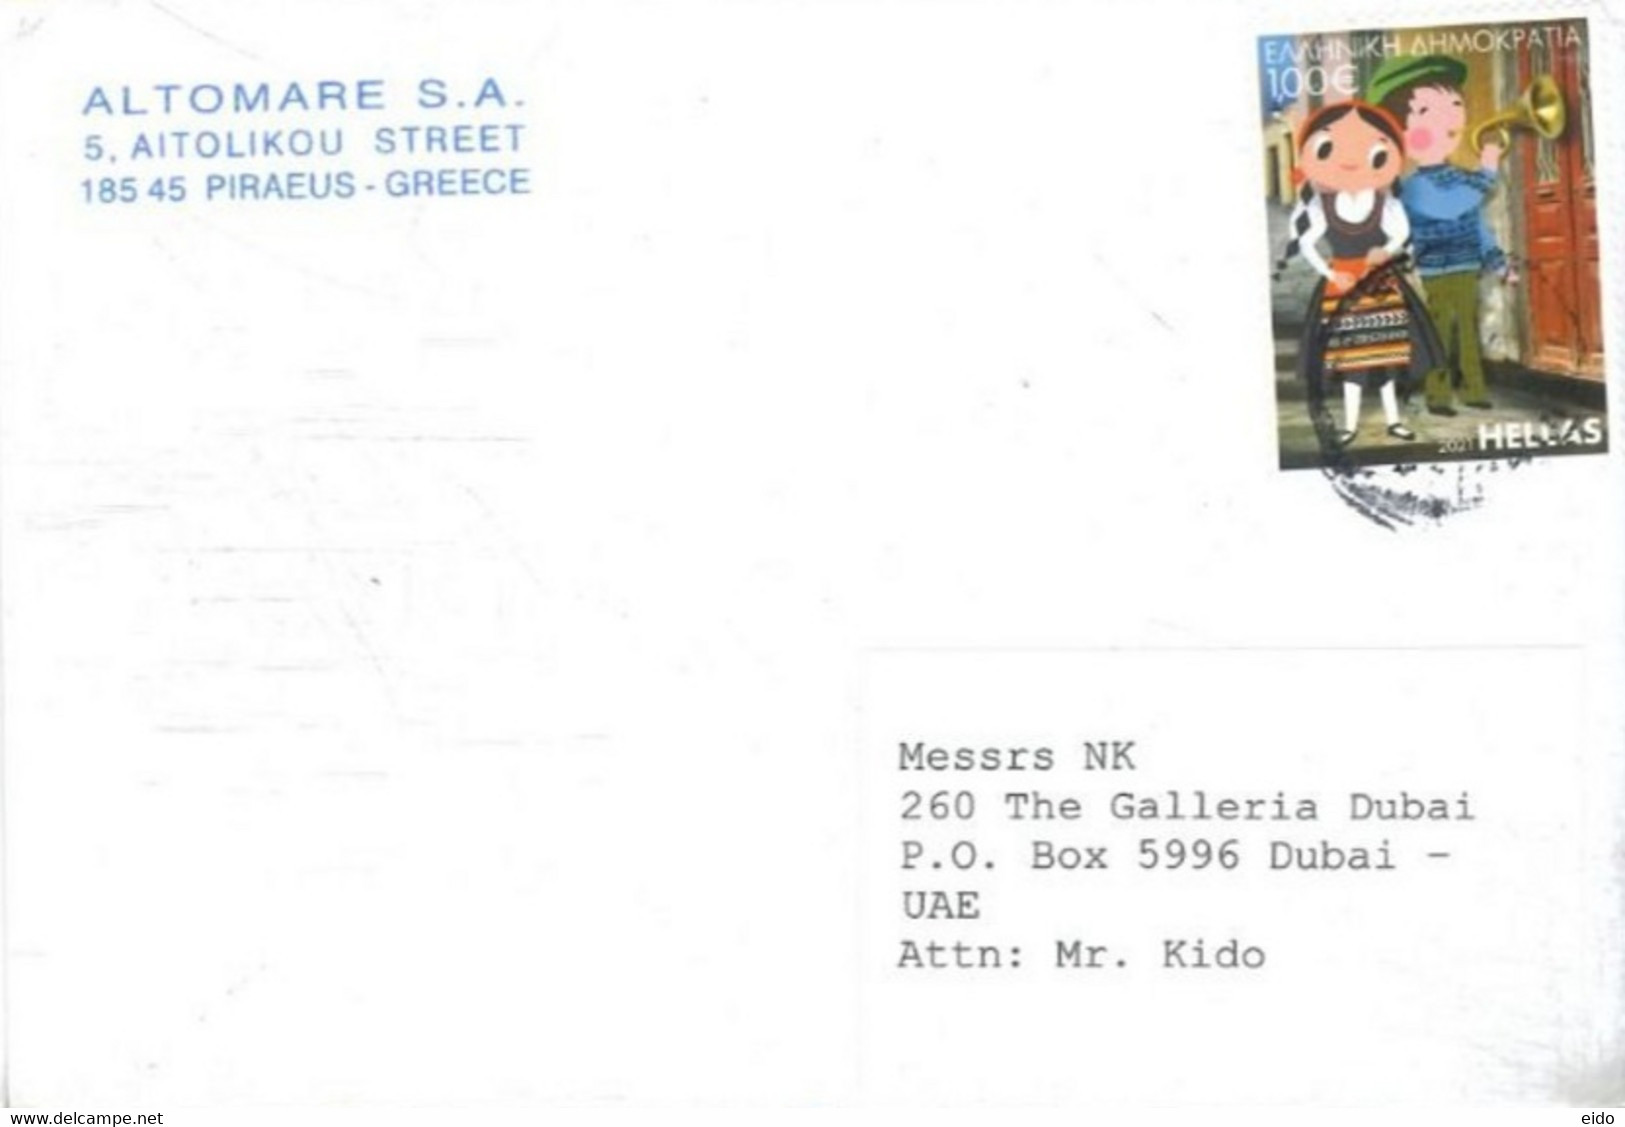 GREECE - 2021 - STAMP  COVER TO DUBAI. - Covers & Documents